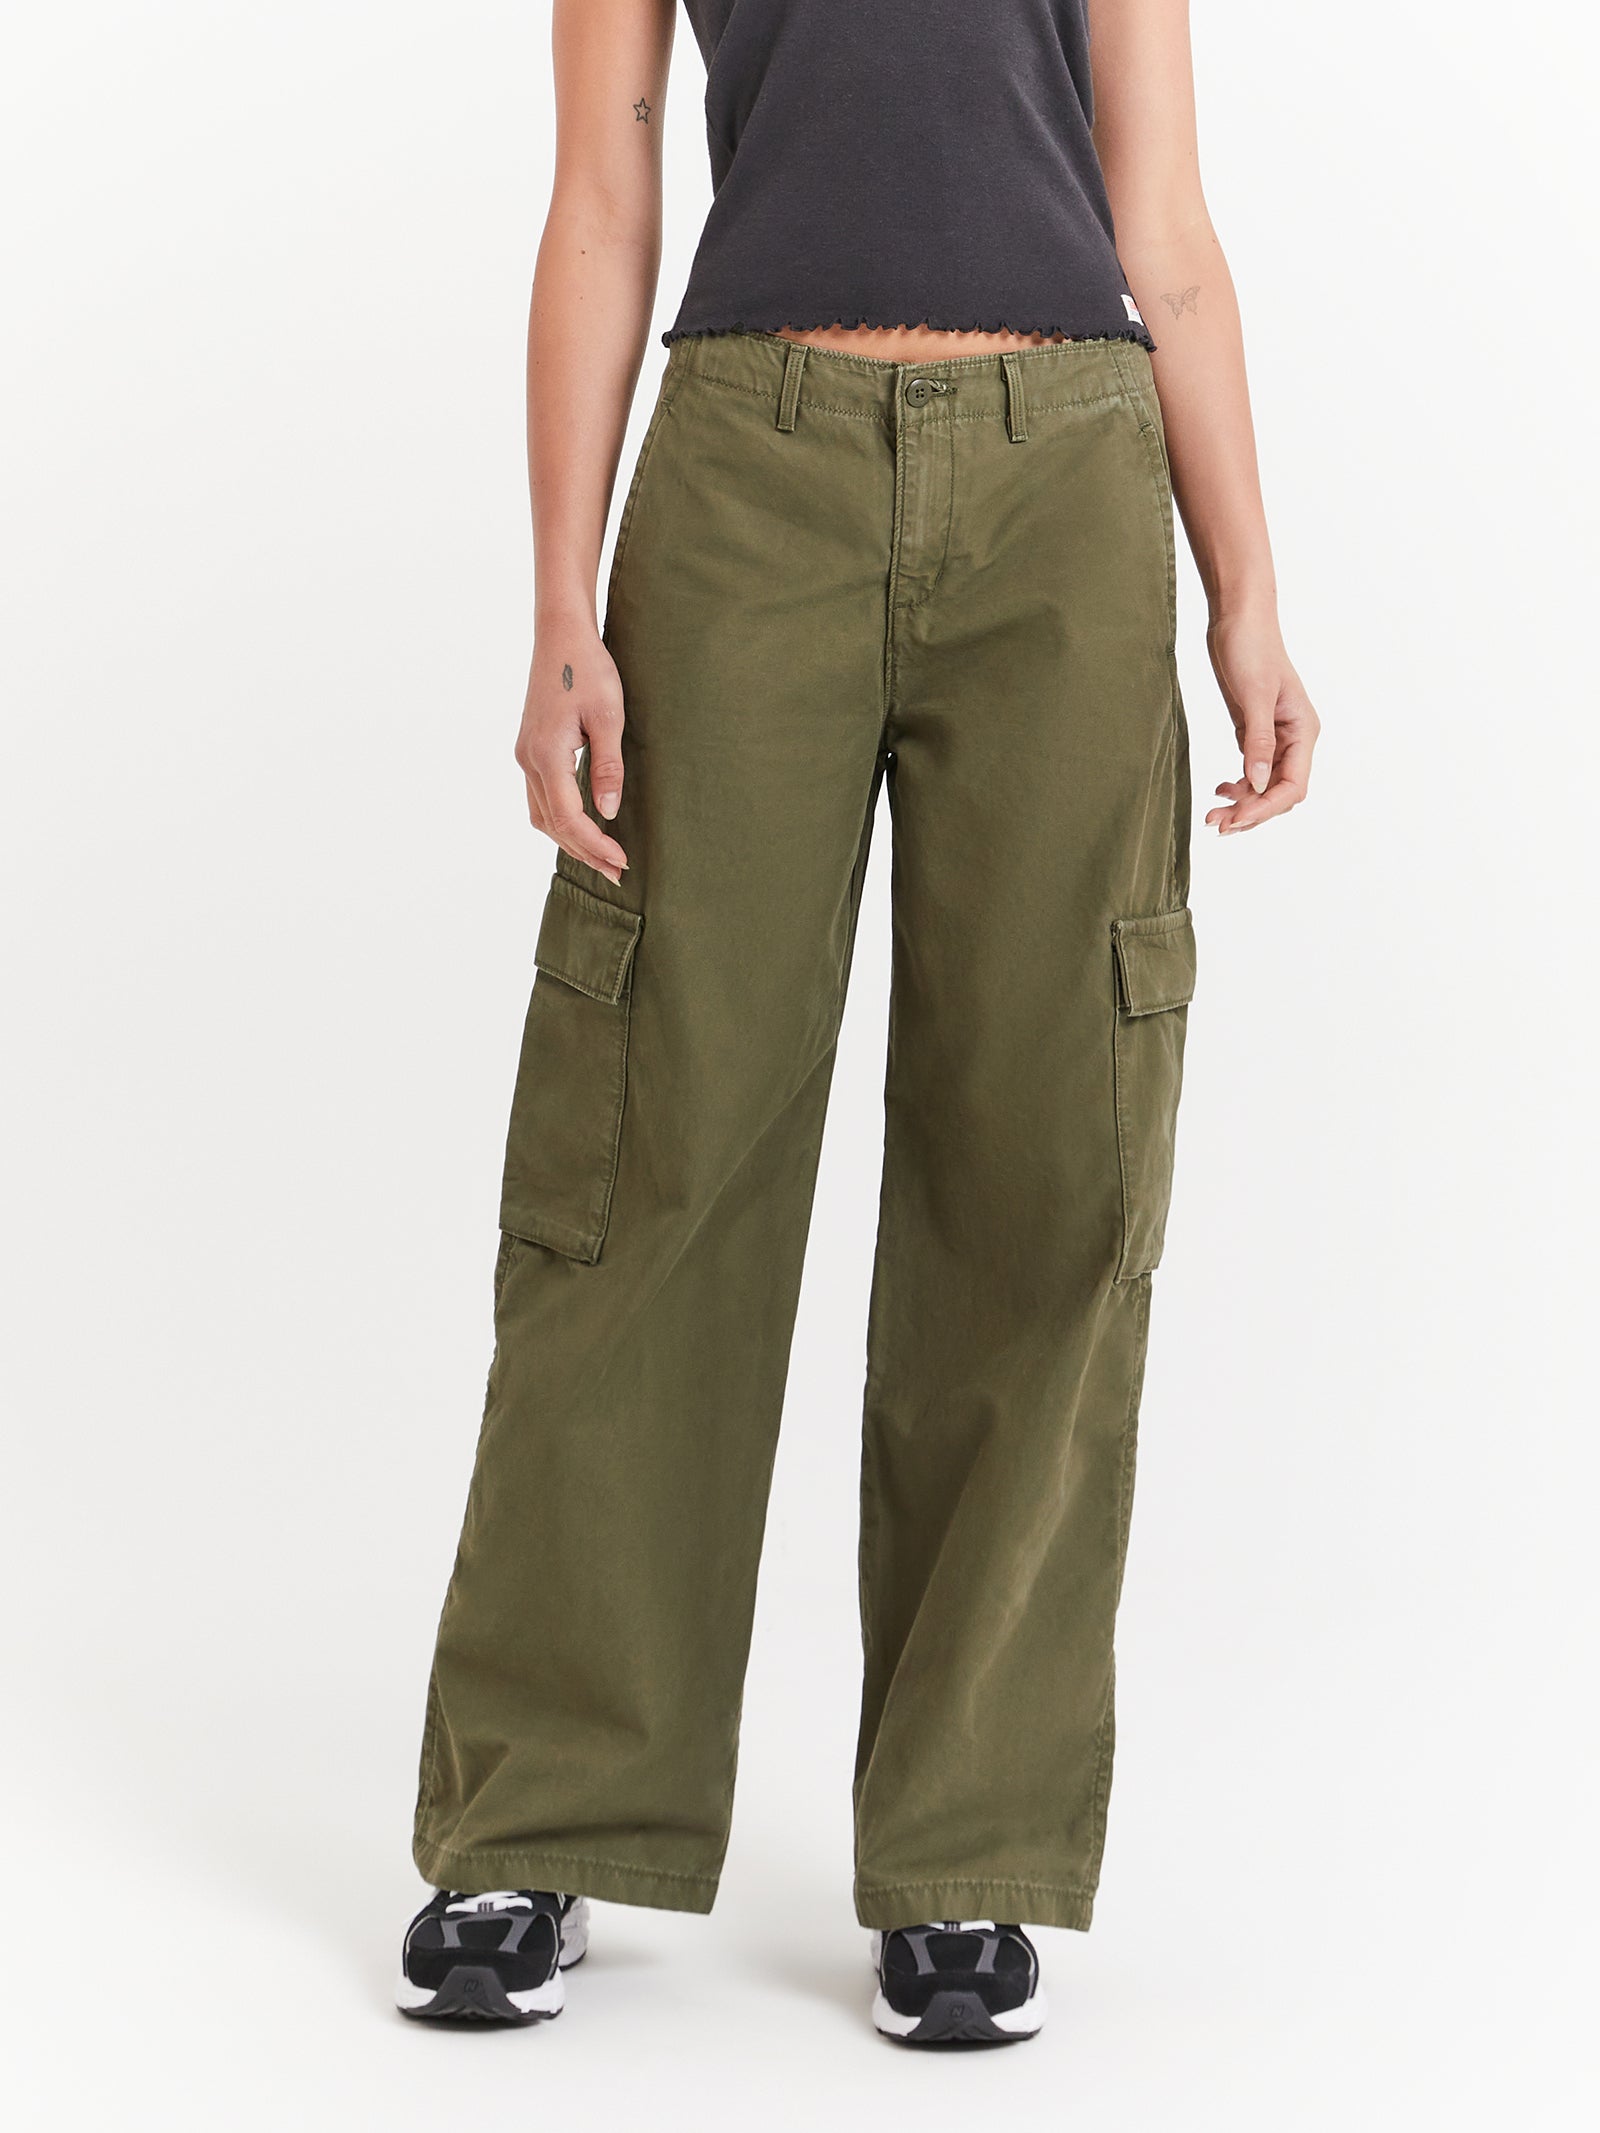 Baggy Cargo Pants in Olive Night Green - Glue Store